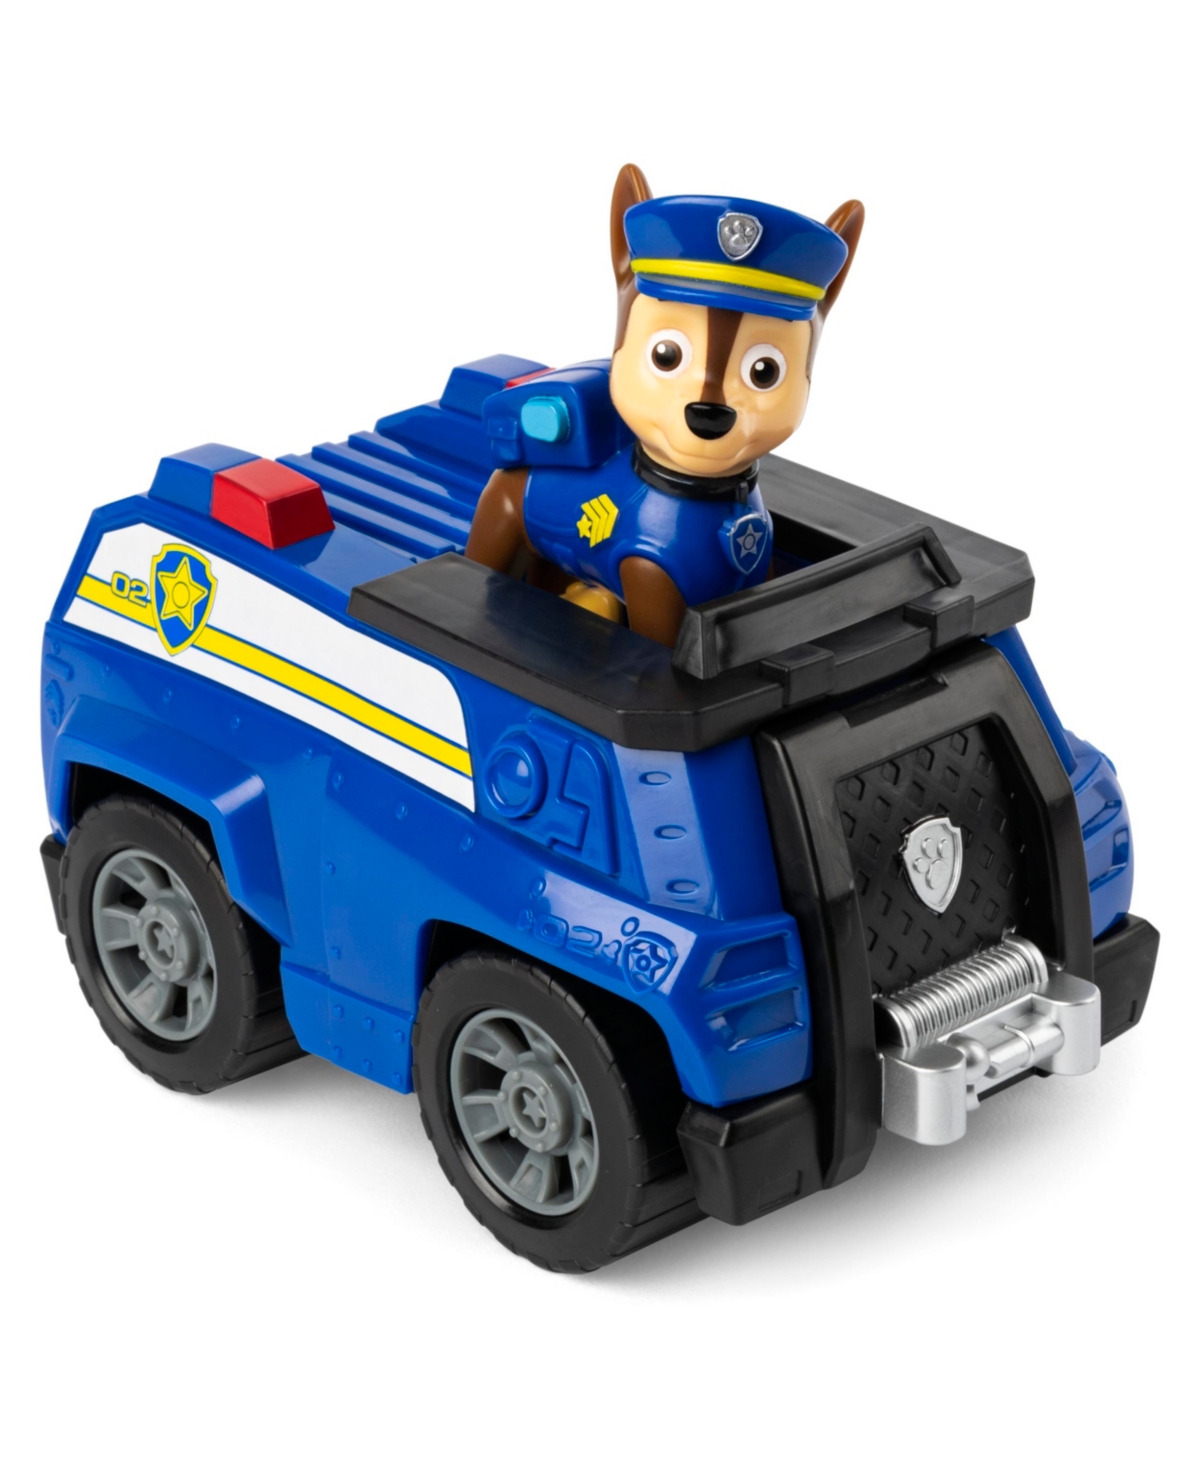 Shop Paw Patrol Chase's Patrol Cruiser Vehicle With Collectible Figure For Kids Aged 3 And Up In No Color